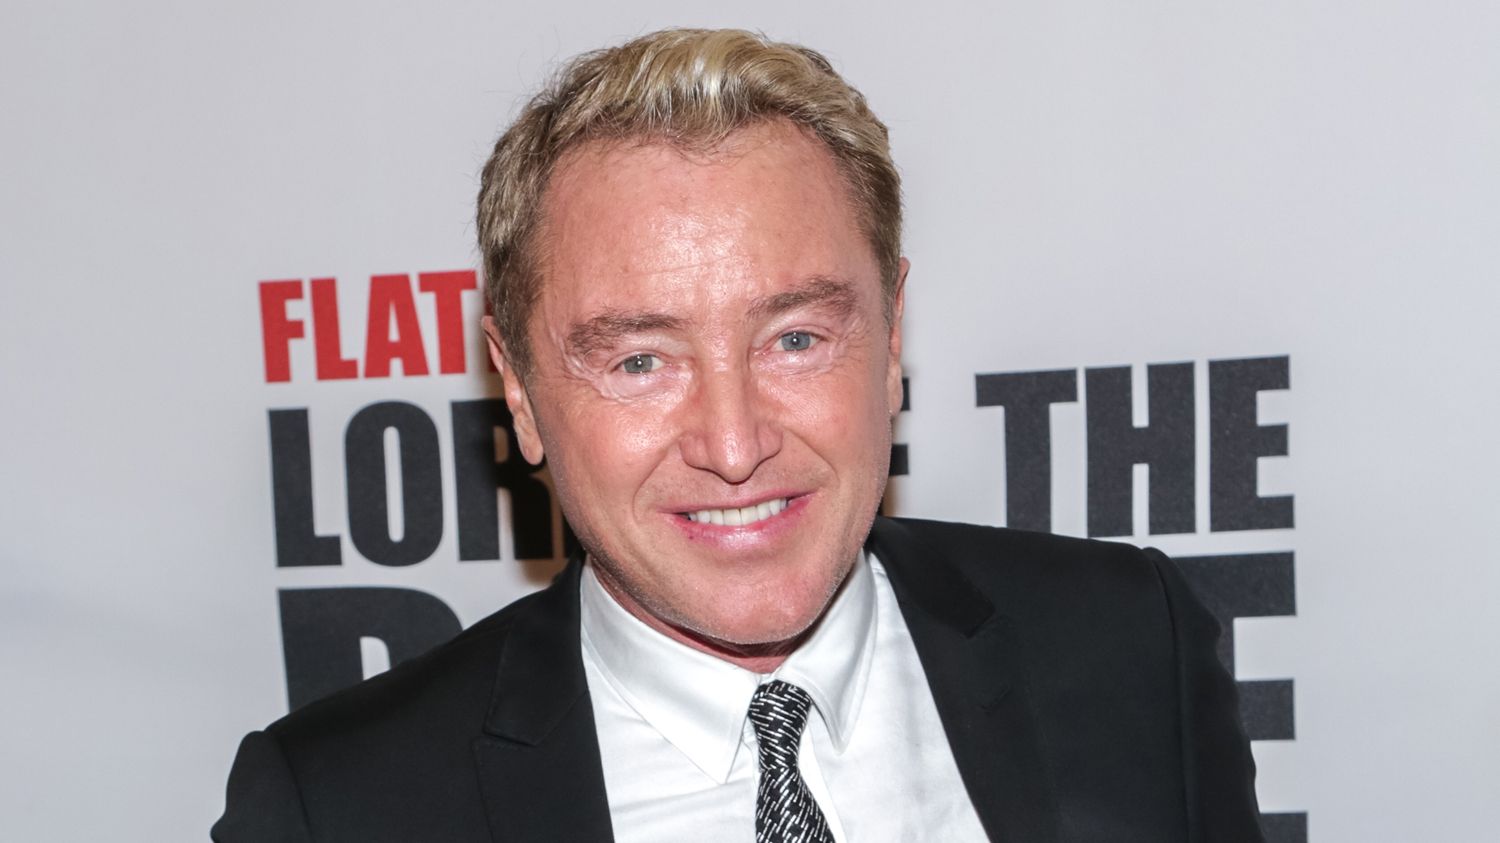 Michael Flatley gives health update following cancer diagnosis